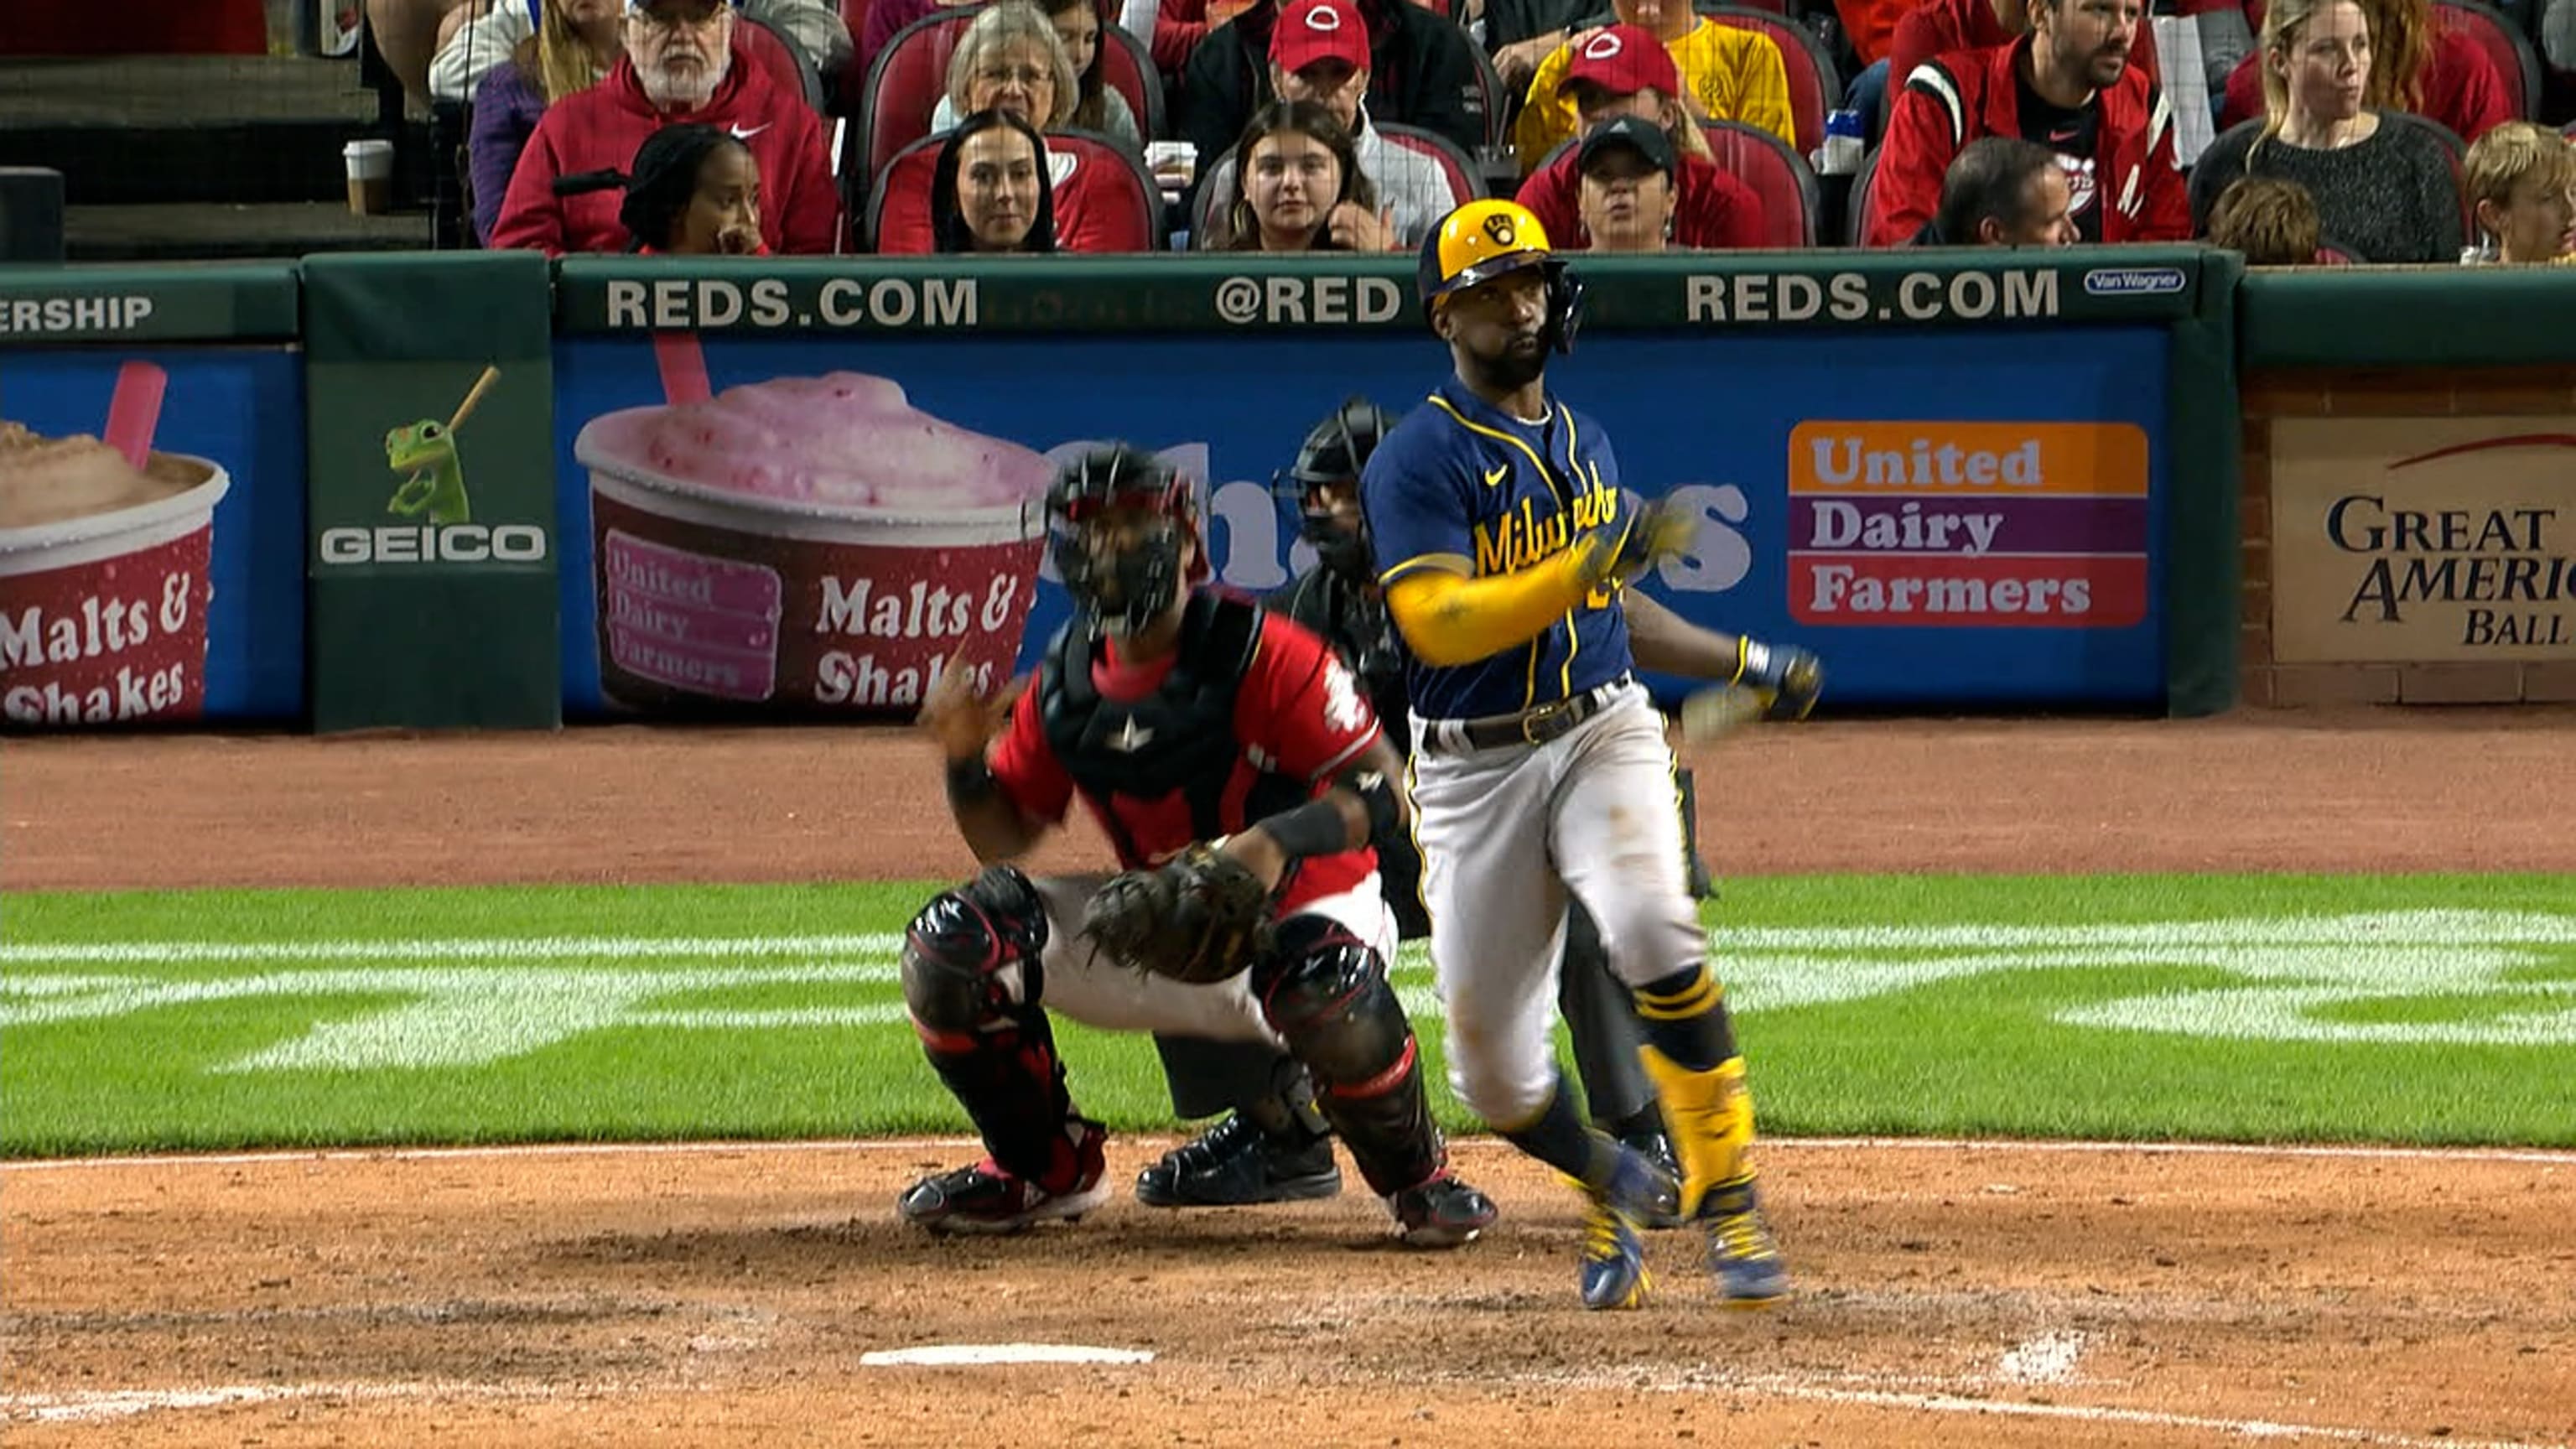 McCutchen passes 1,000 career RBIs as Brewers beat Reds 5-3